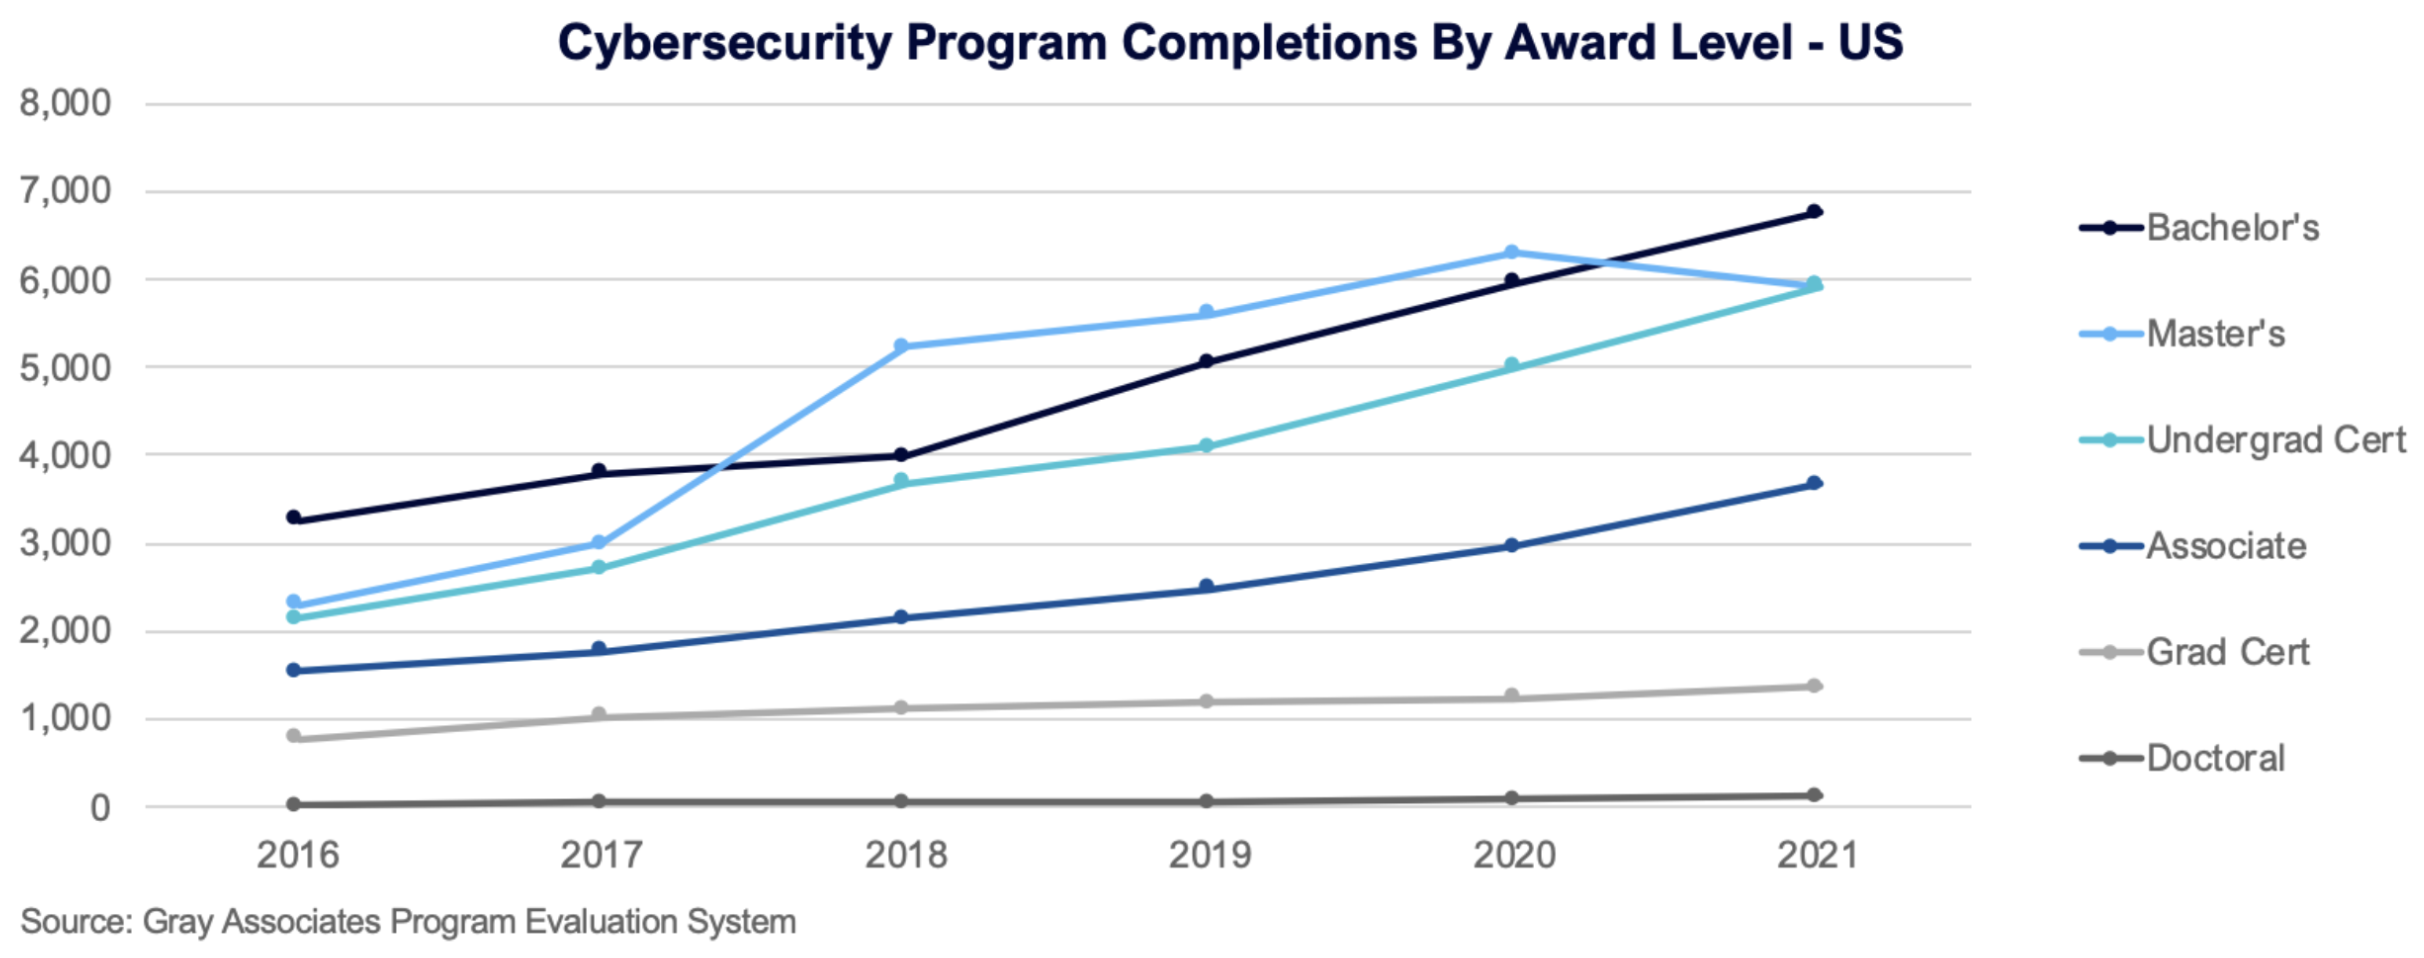 Cybersecurity Program Completions by Award Level - US